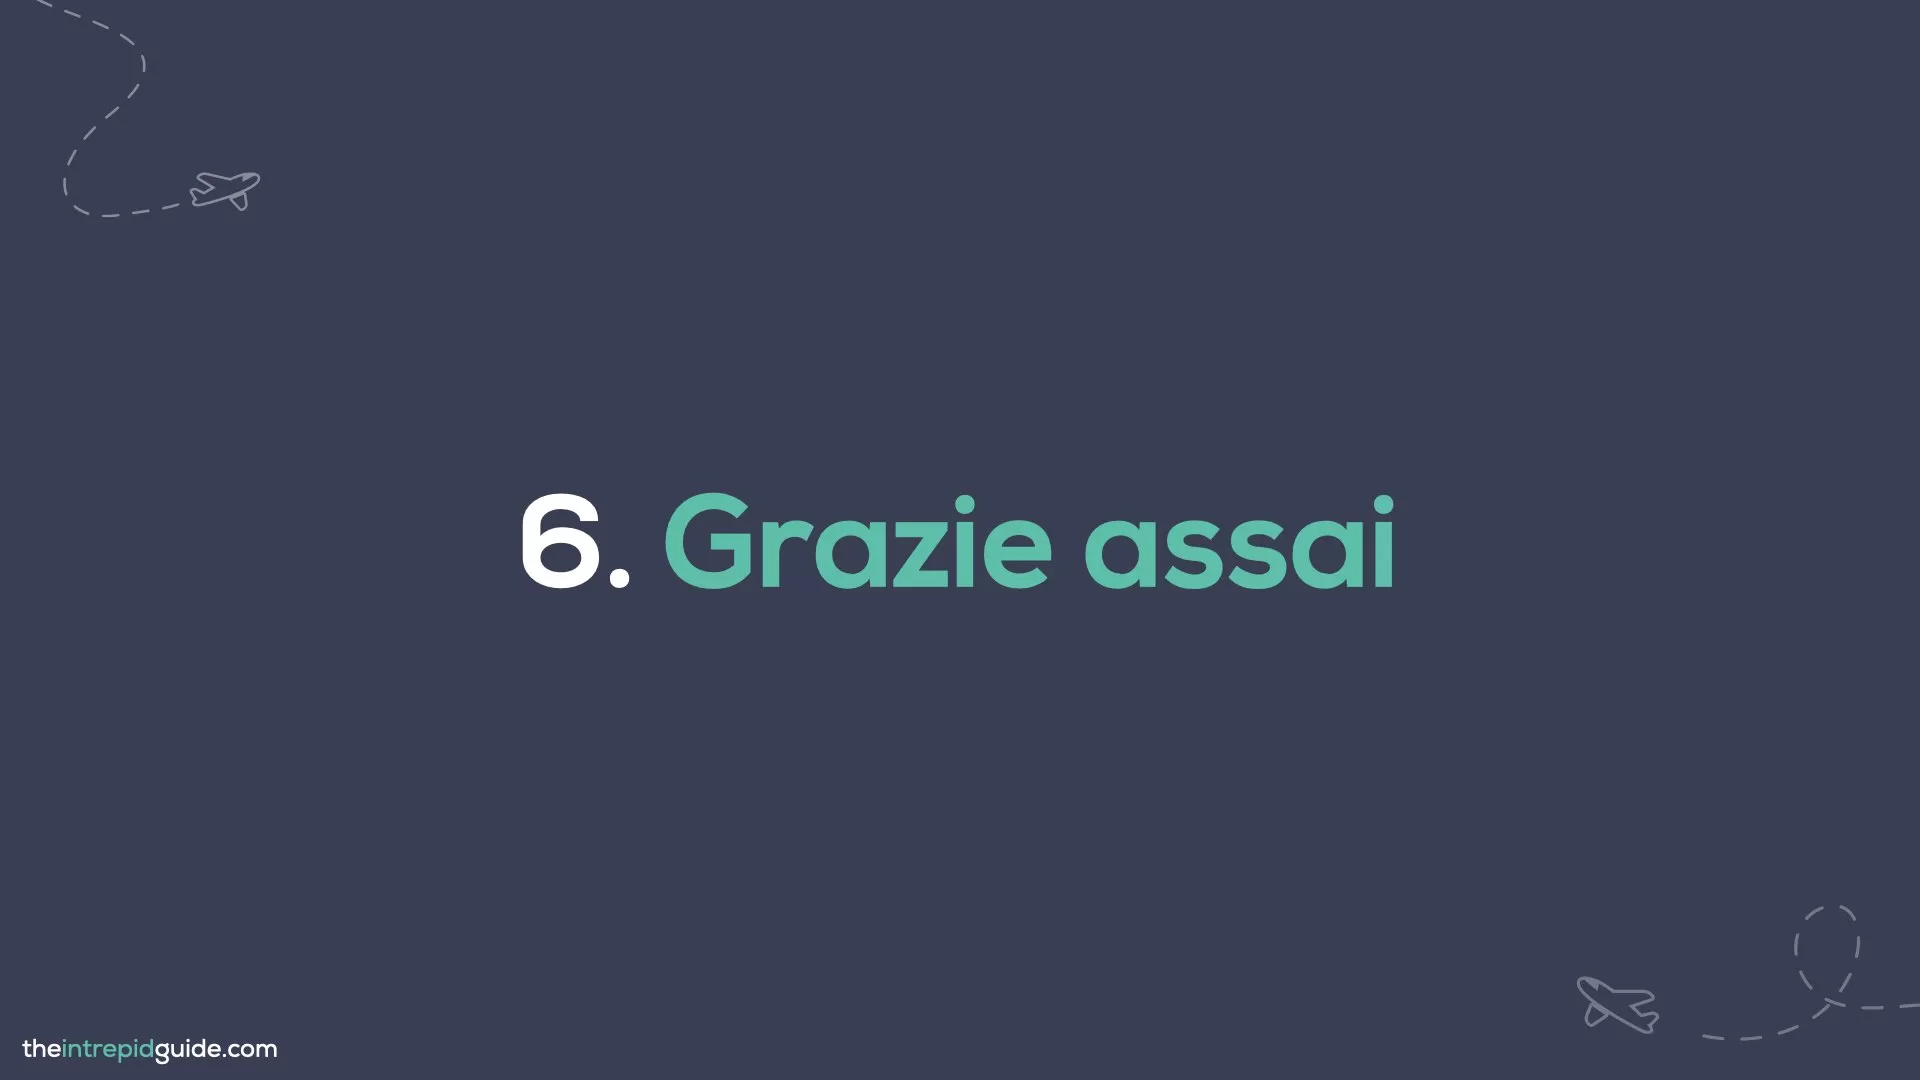 How to say thank you in Italian - Grazie assai